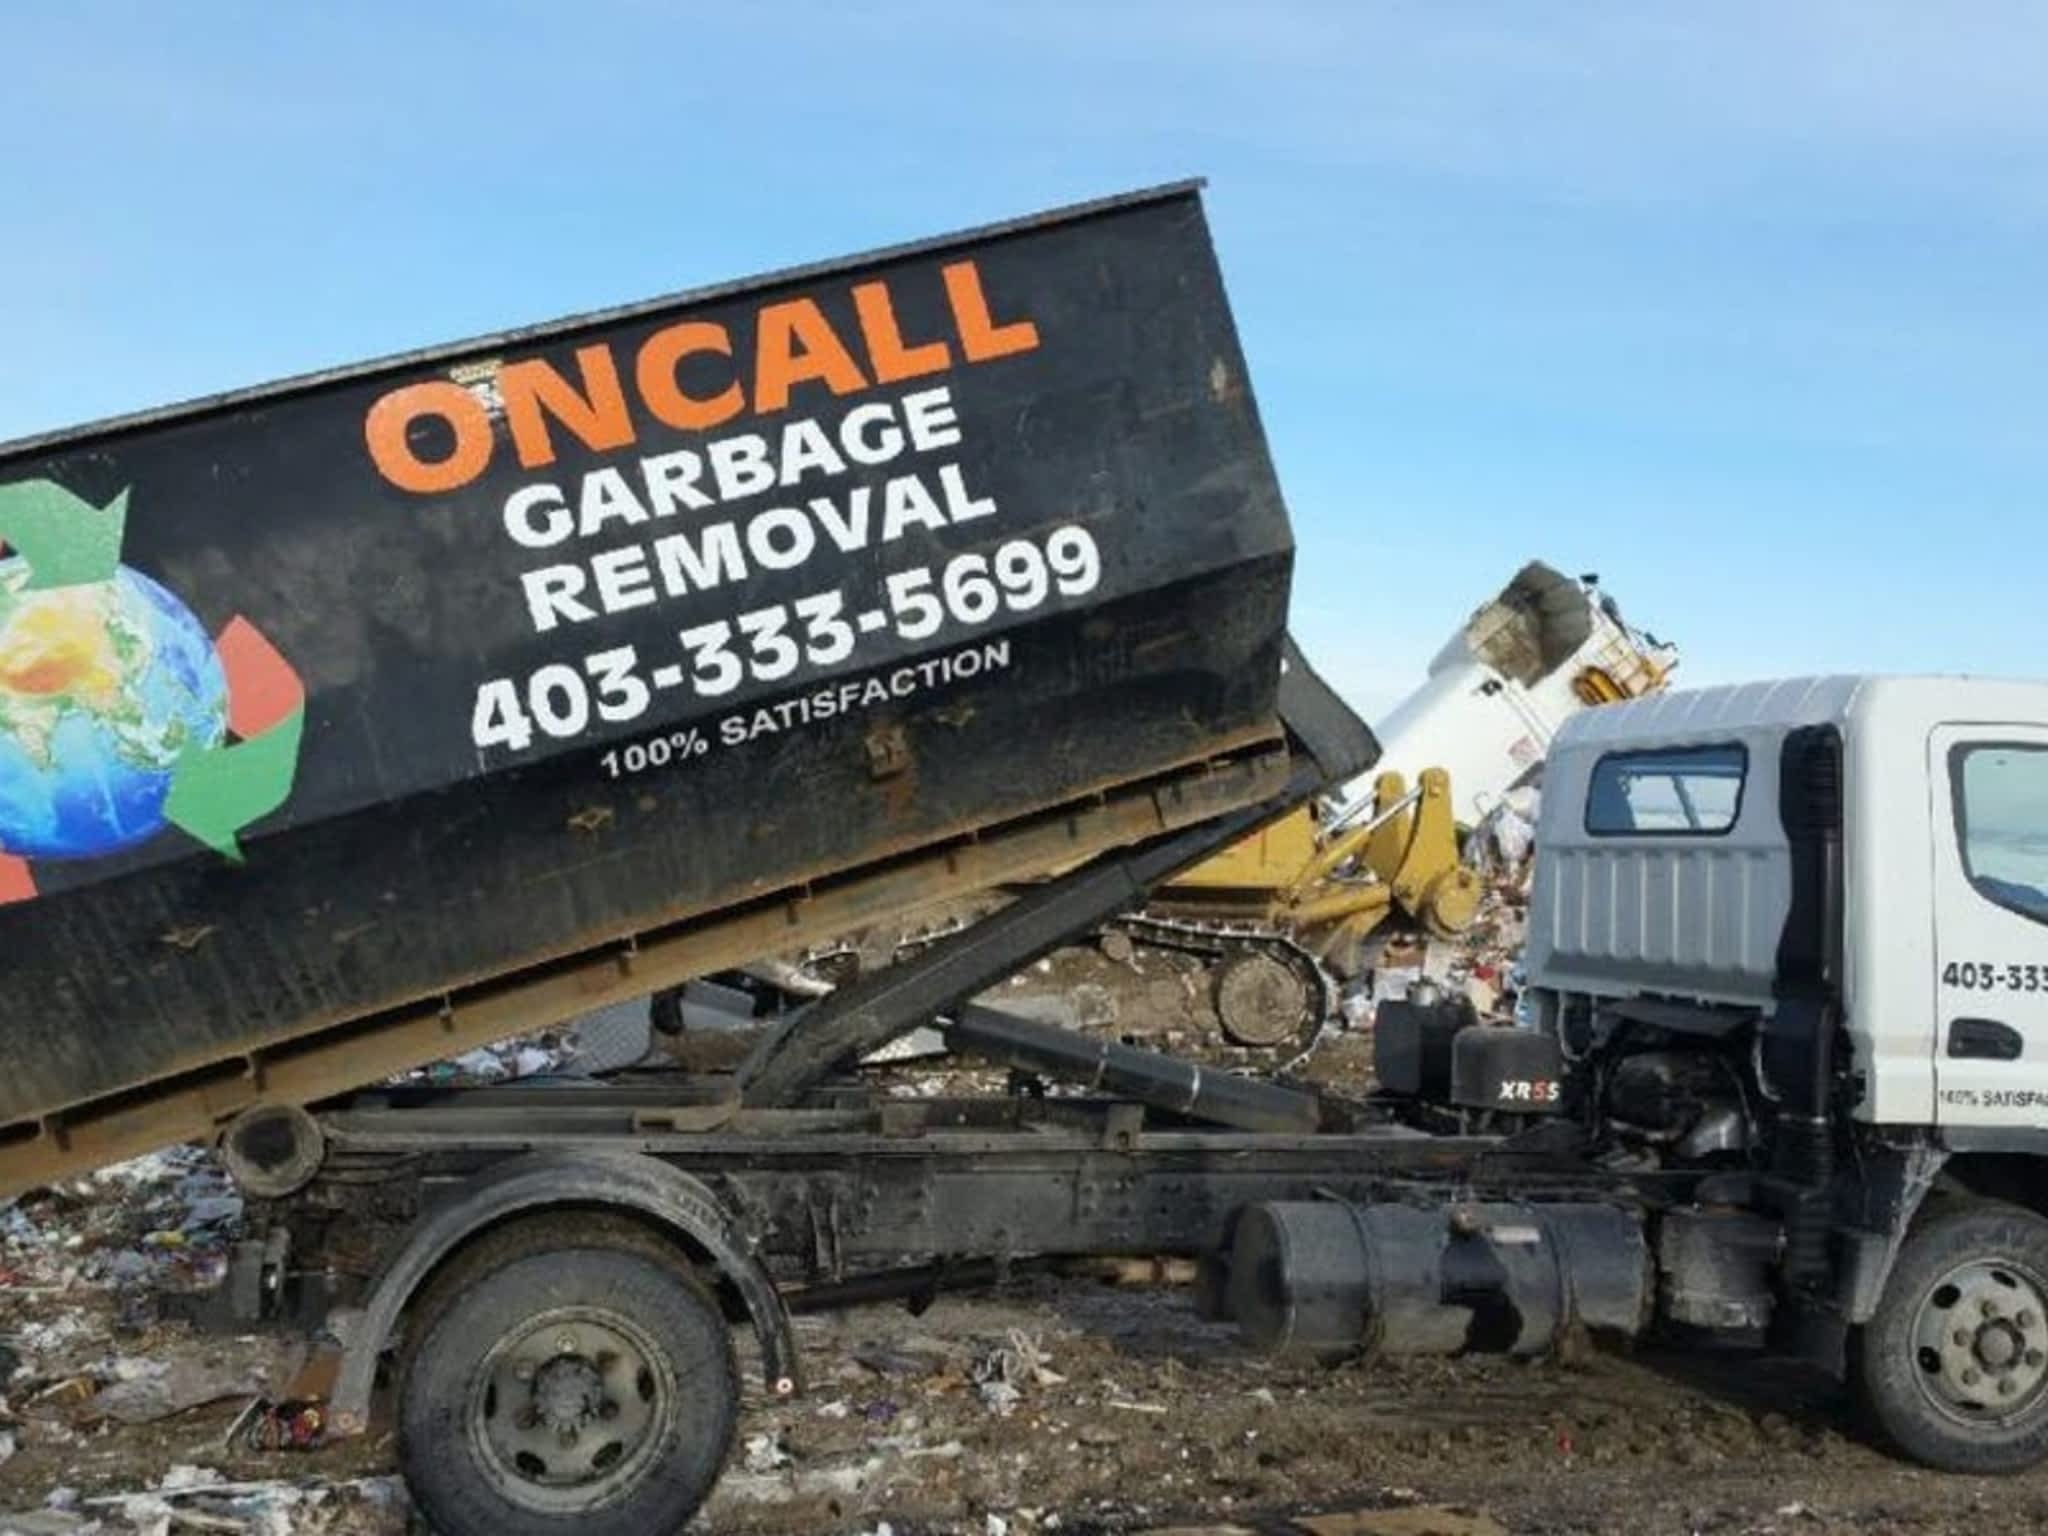 photo ONCALL Garbage Removal Ltd